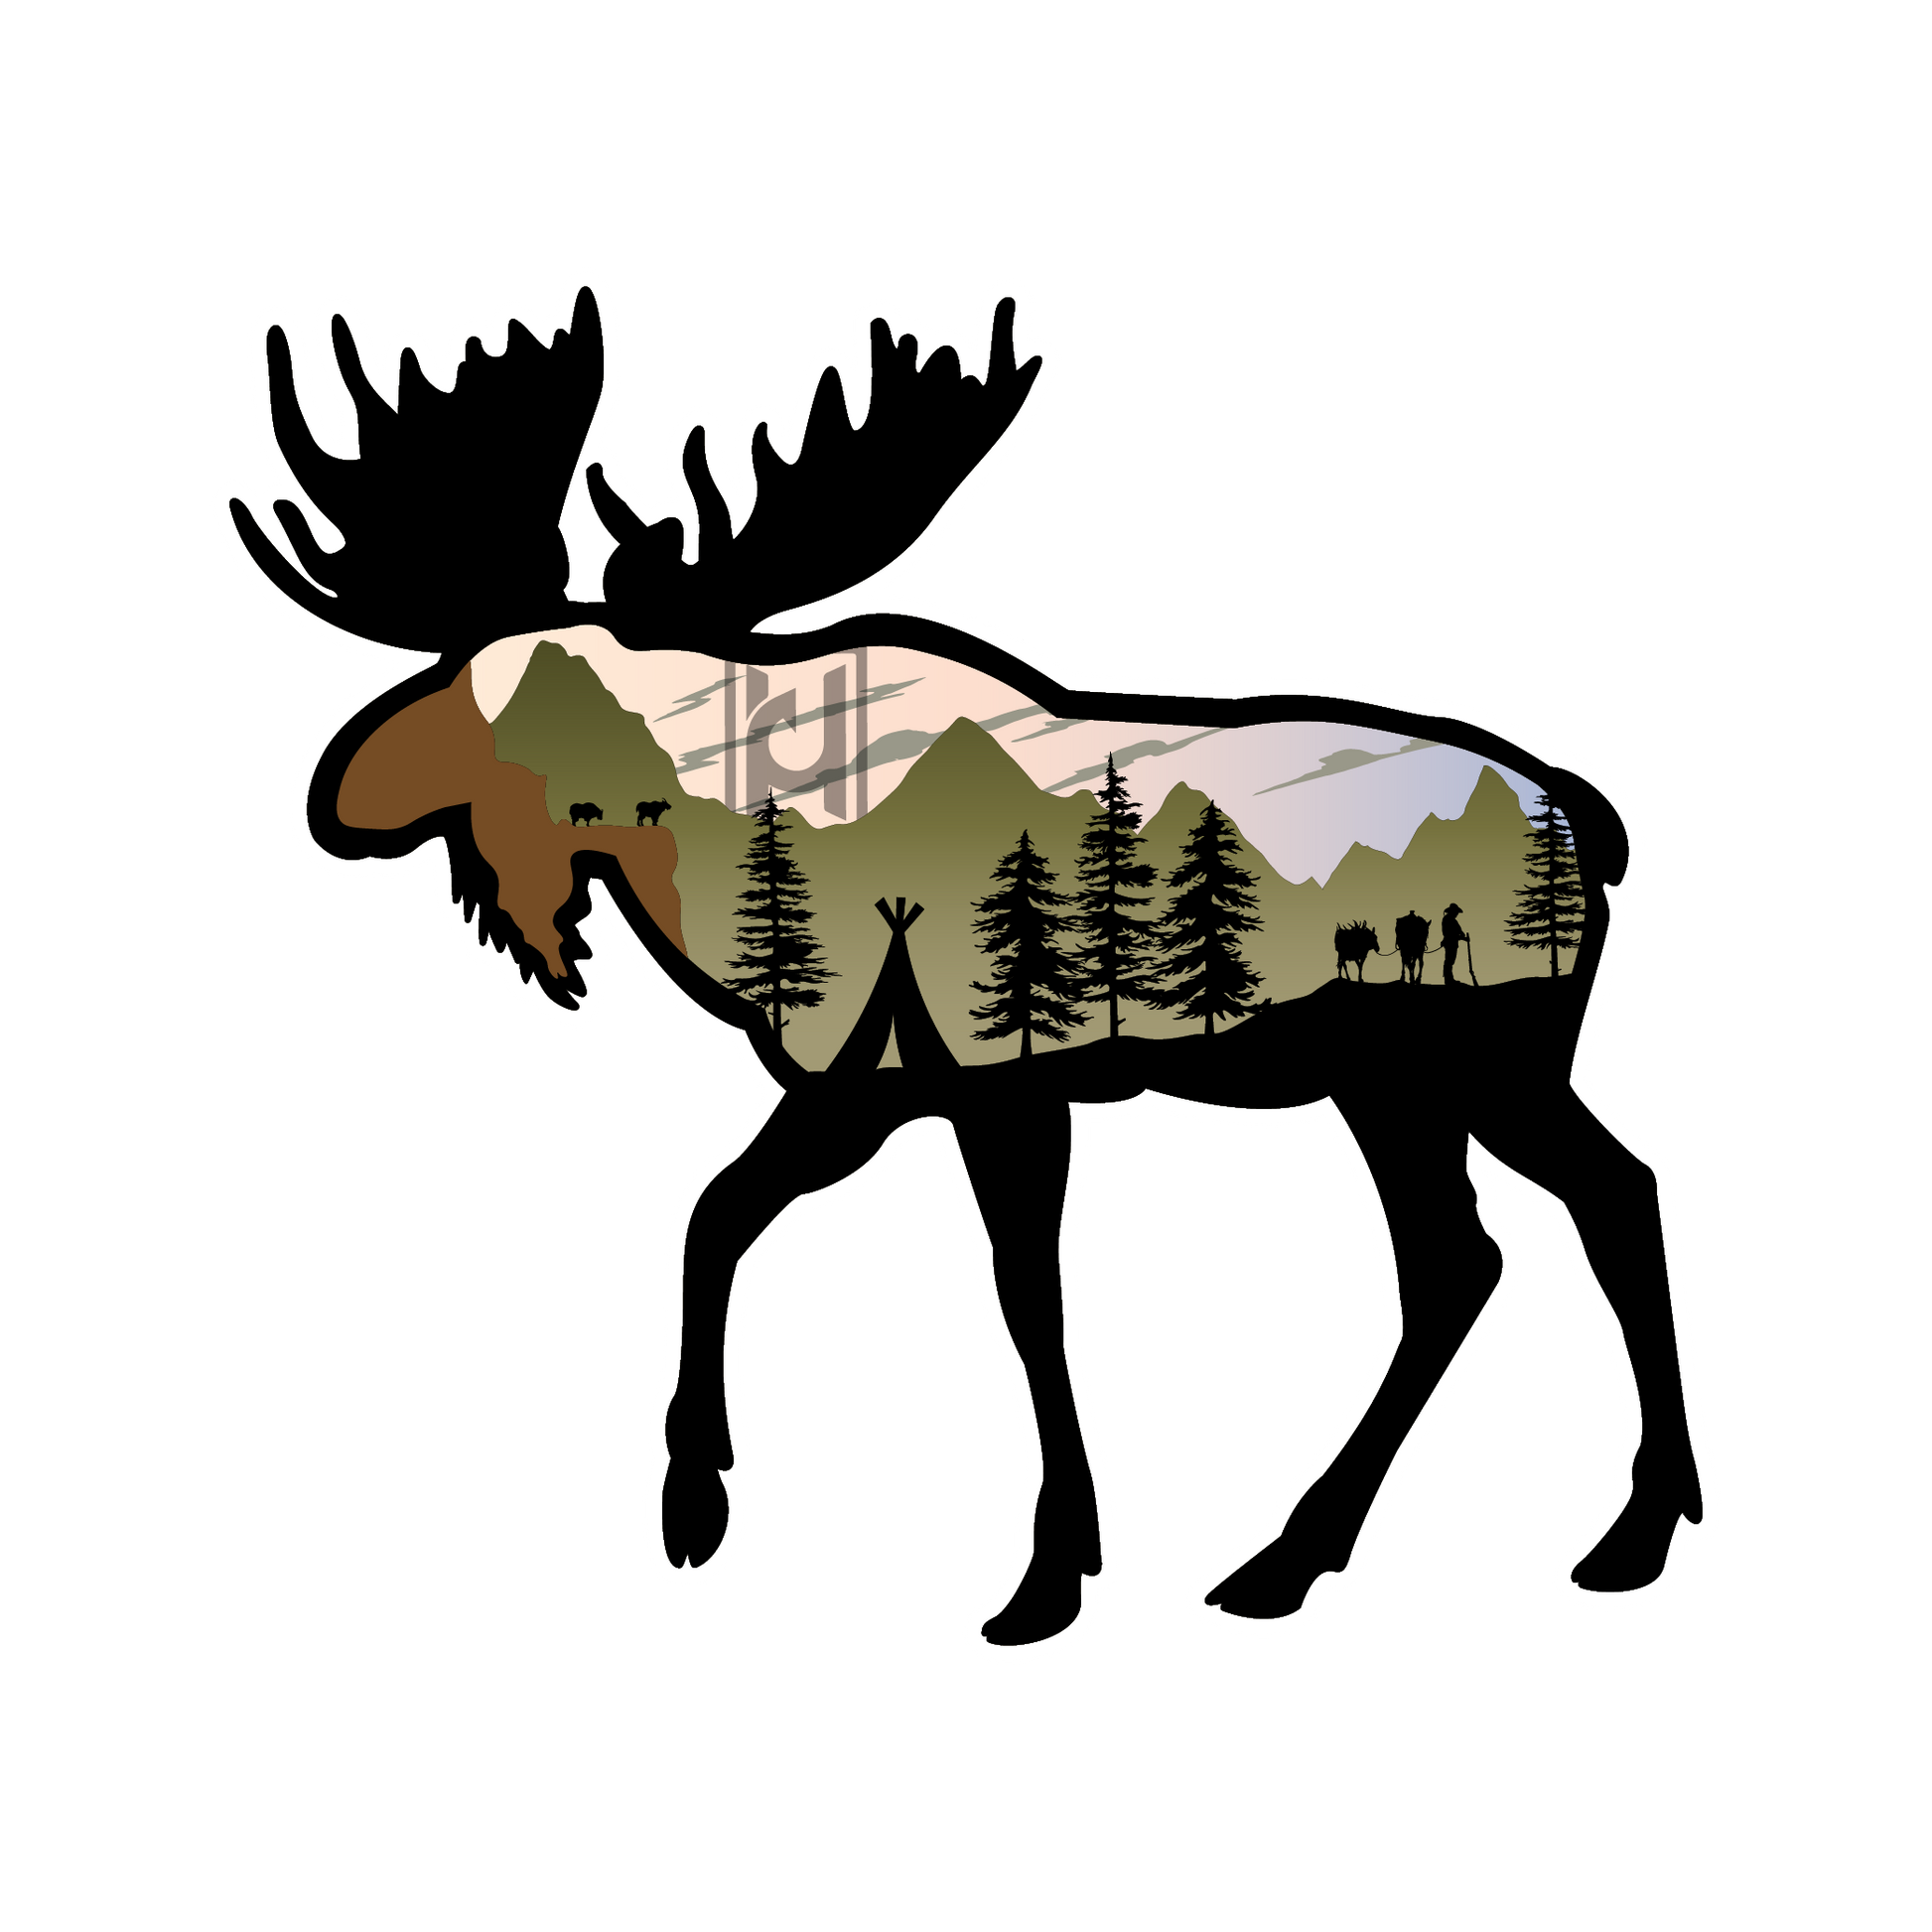 Moose sticker modeled after our wood art! Features a mountain camping scene.